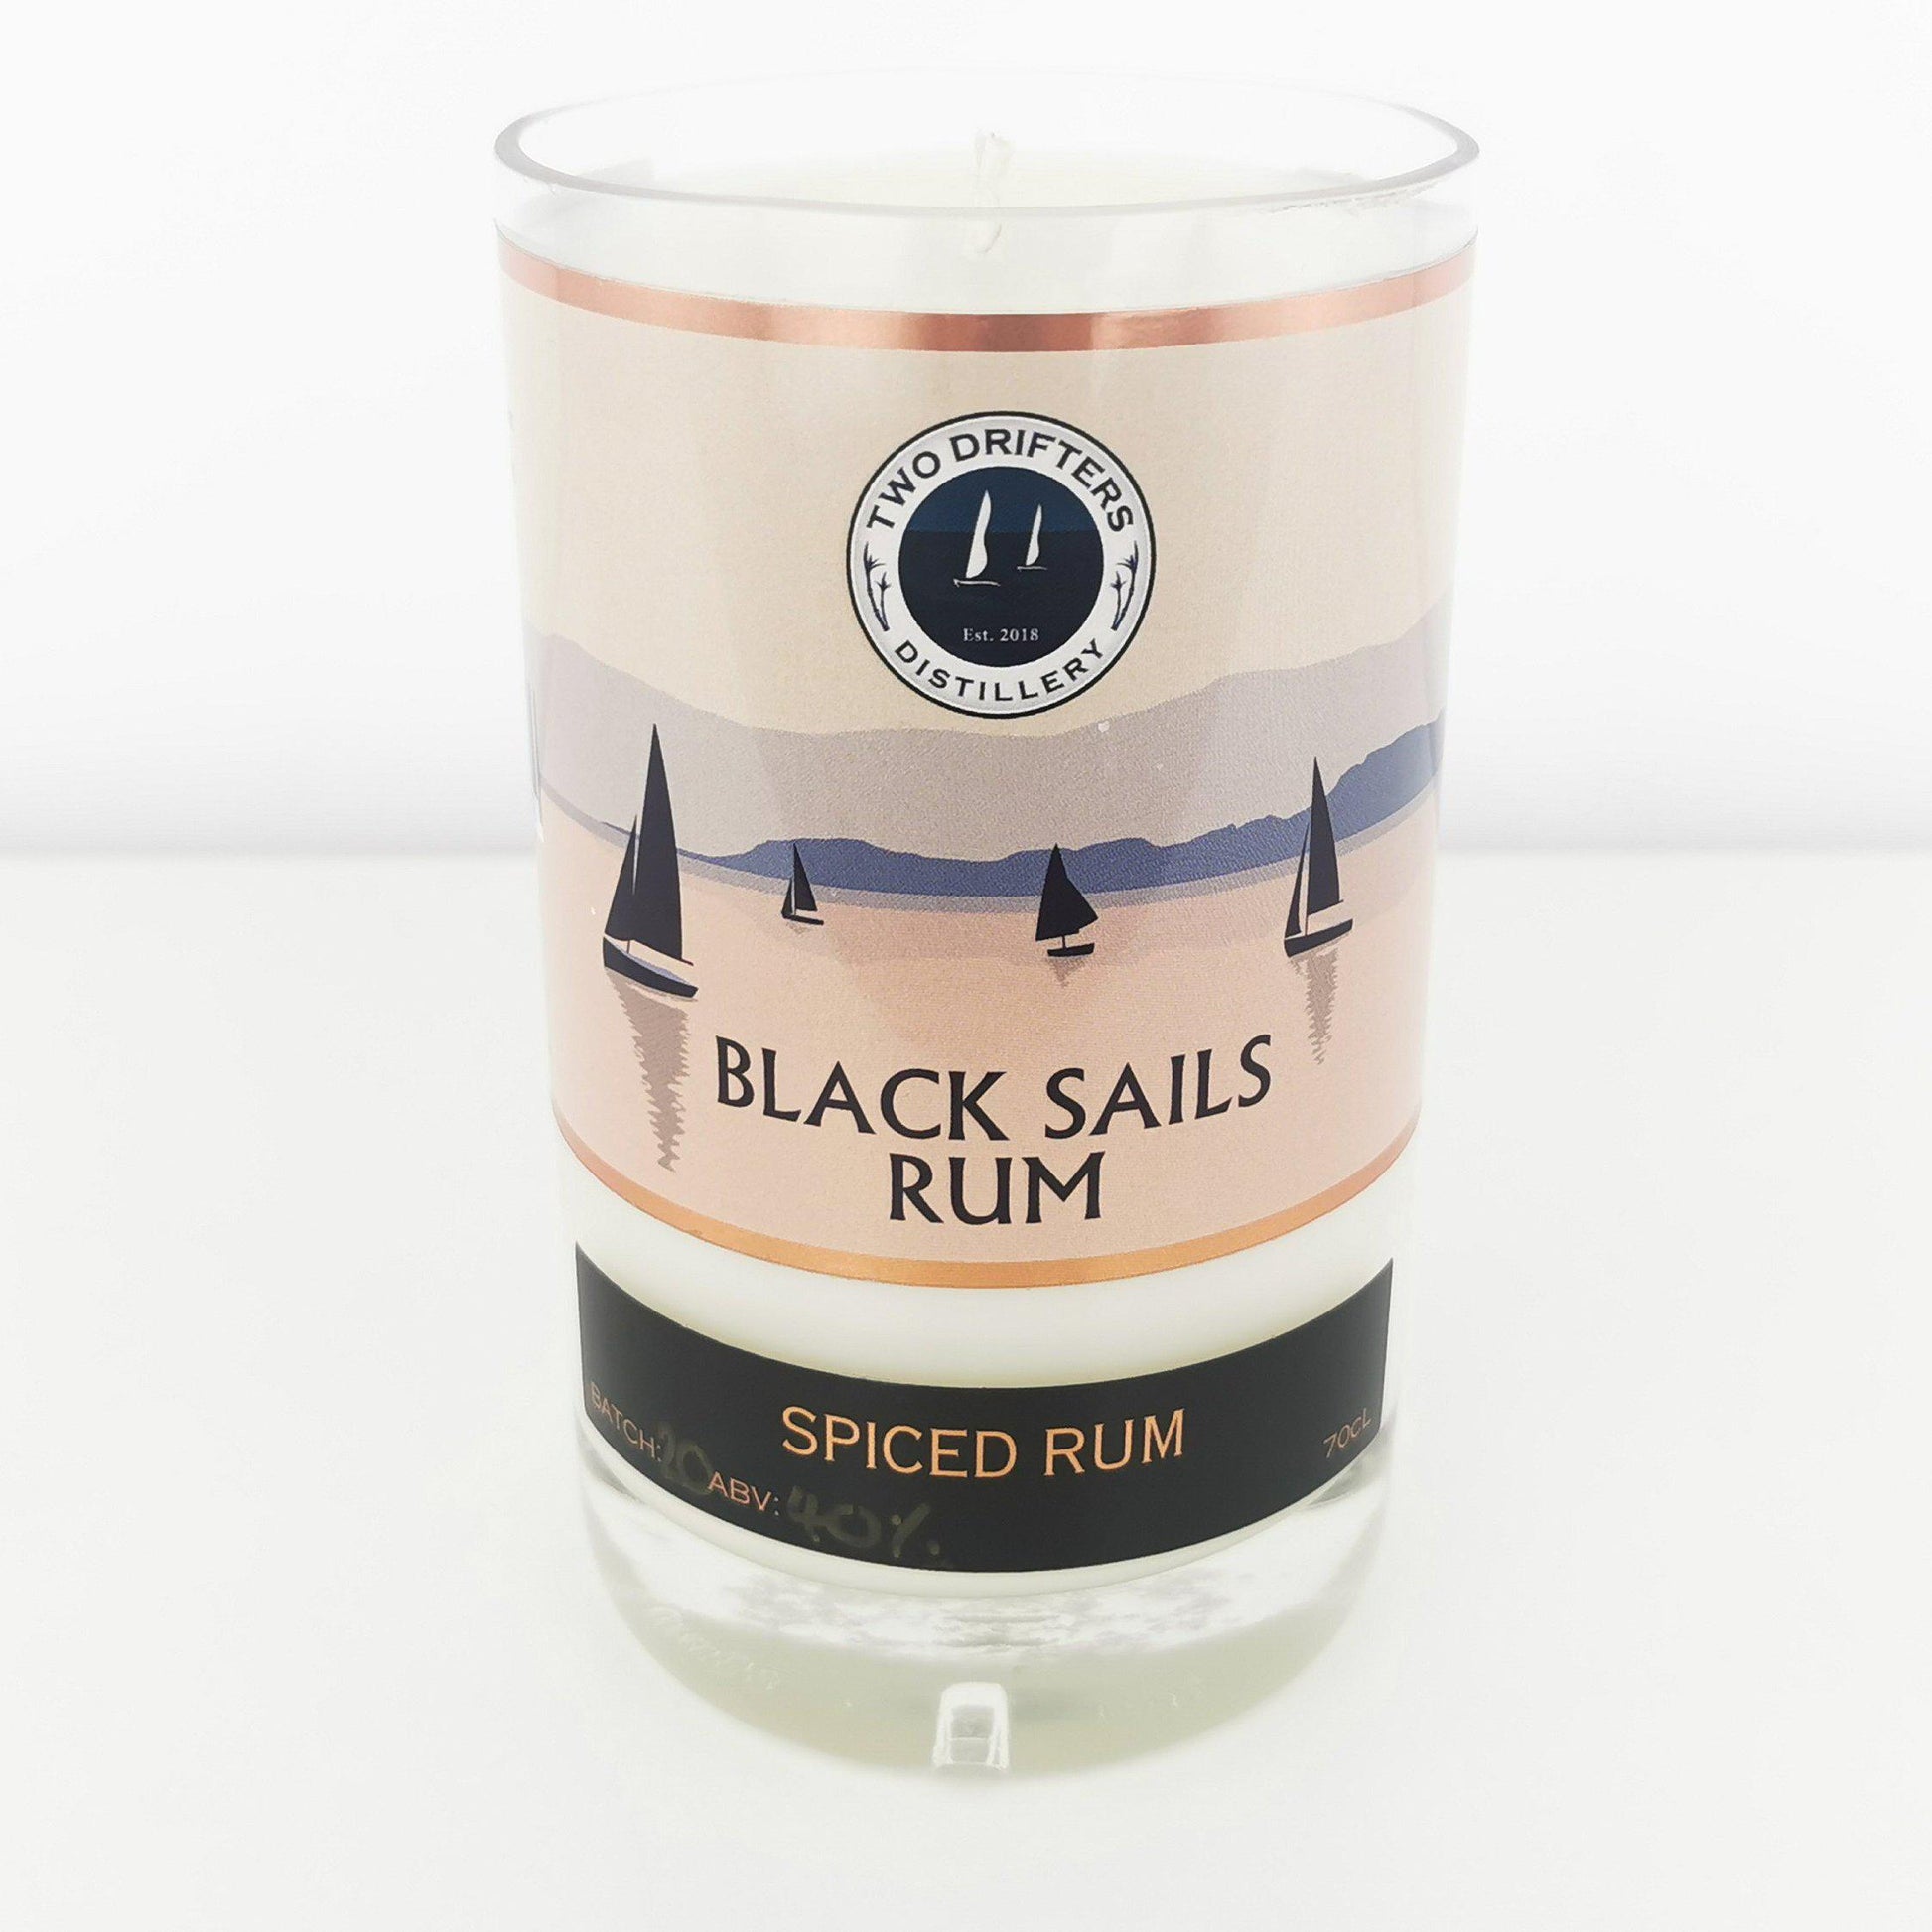 Two Drifters Black Sails Spiced Rum Bottle Candle Rum Bottle Candles Adhock Homeware